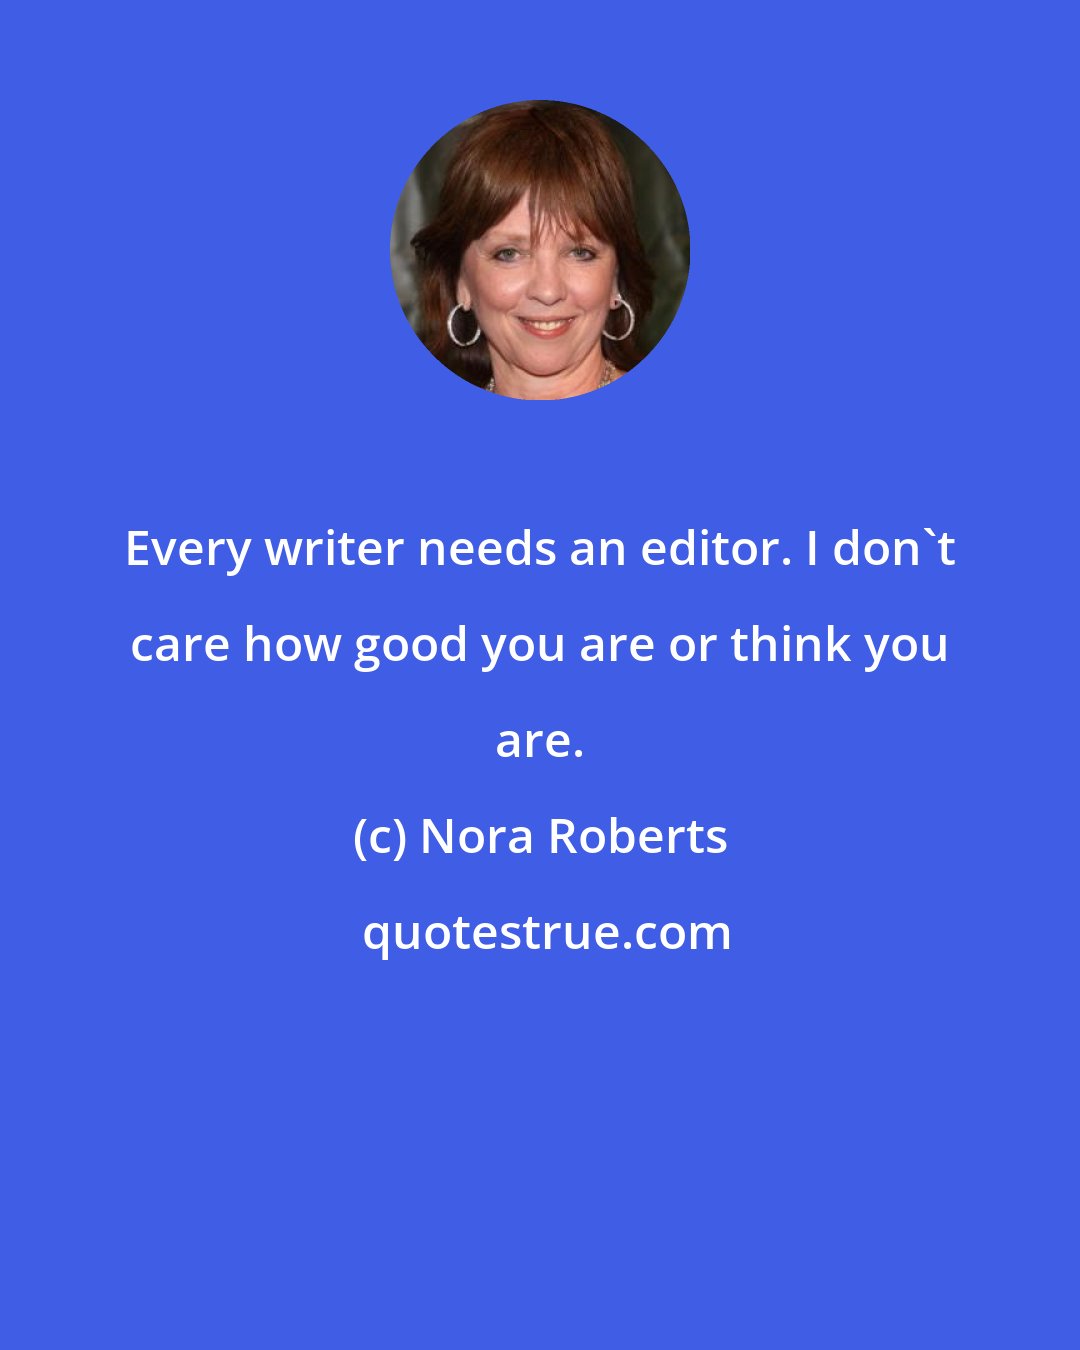 Nora Roberts: Every writer needs an editor. I don't care how good you are or think you are.